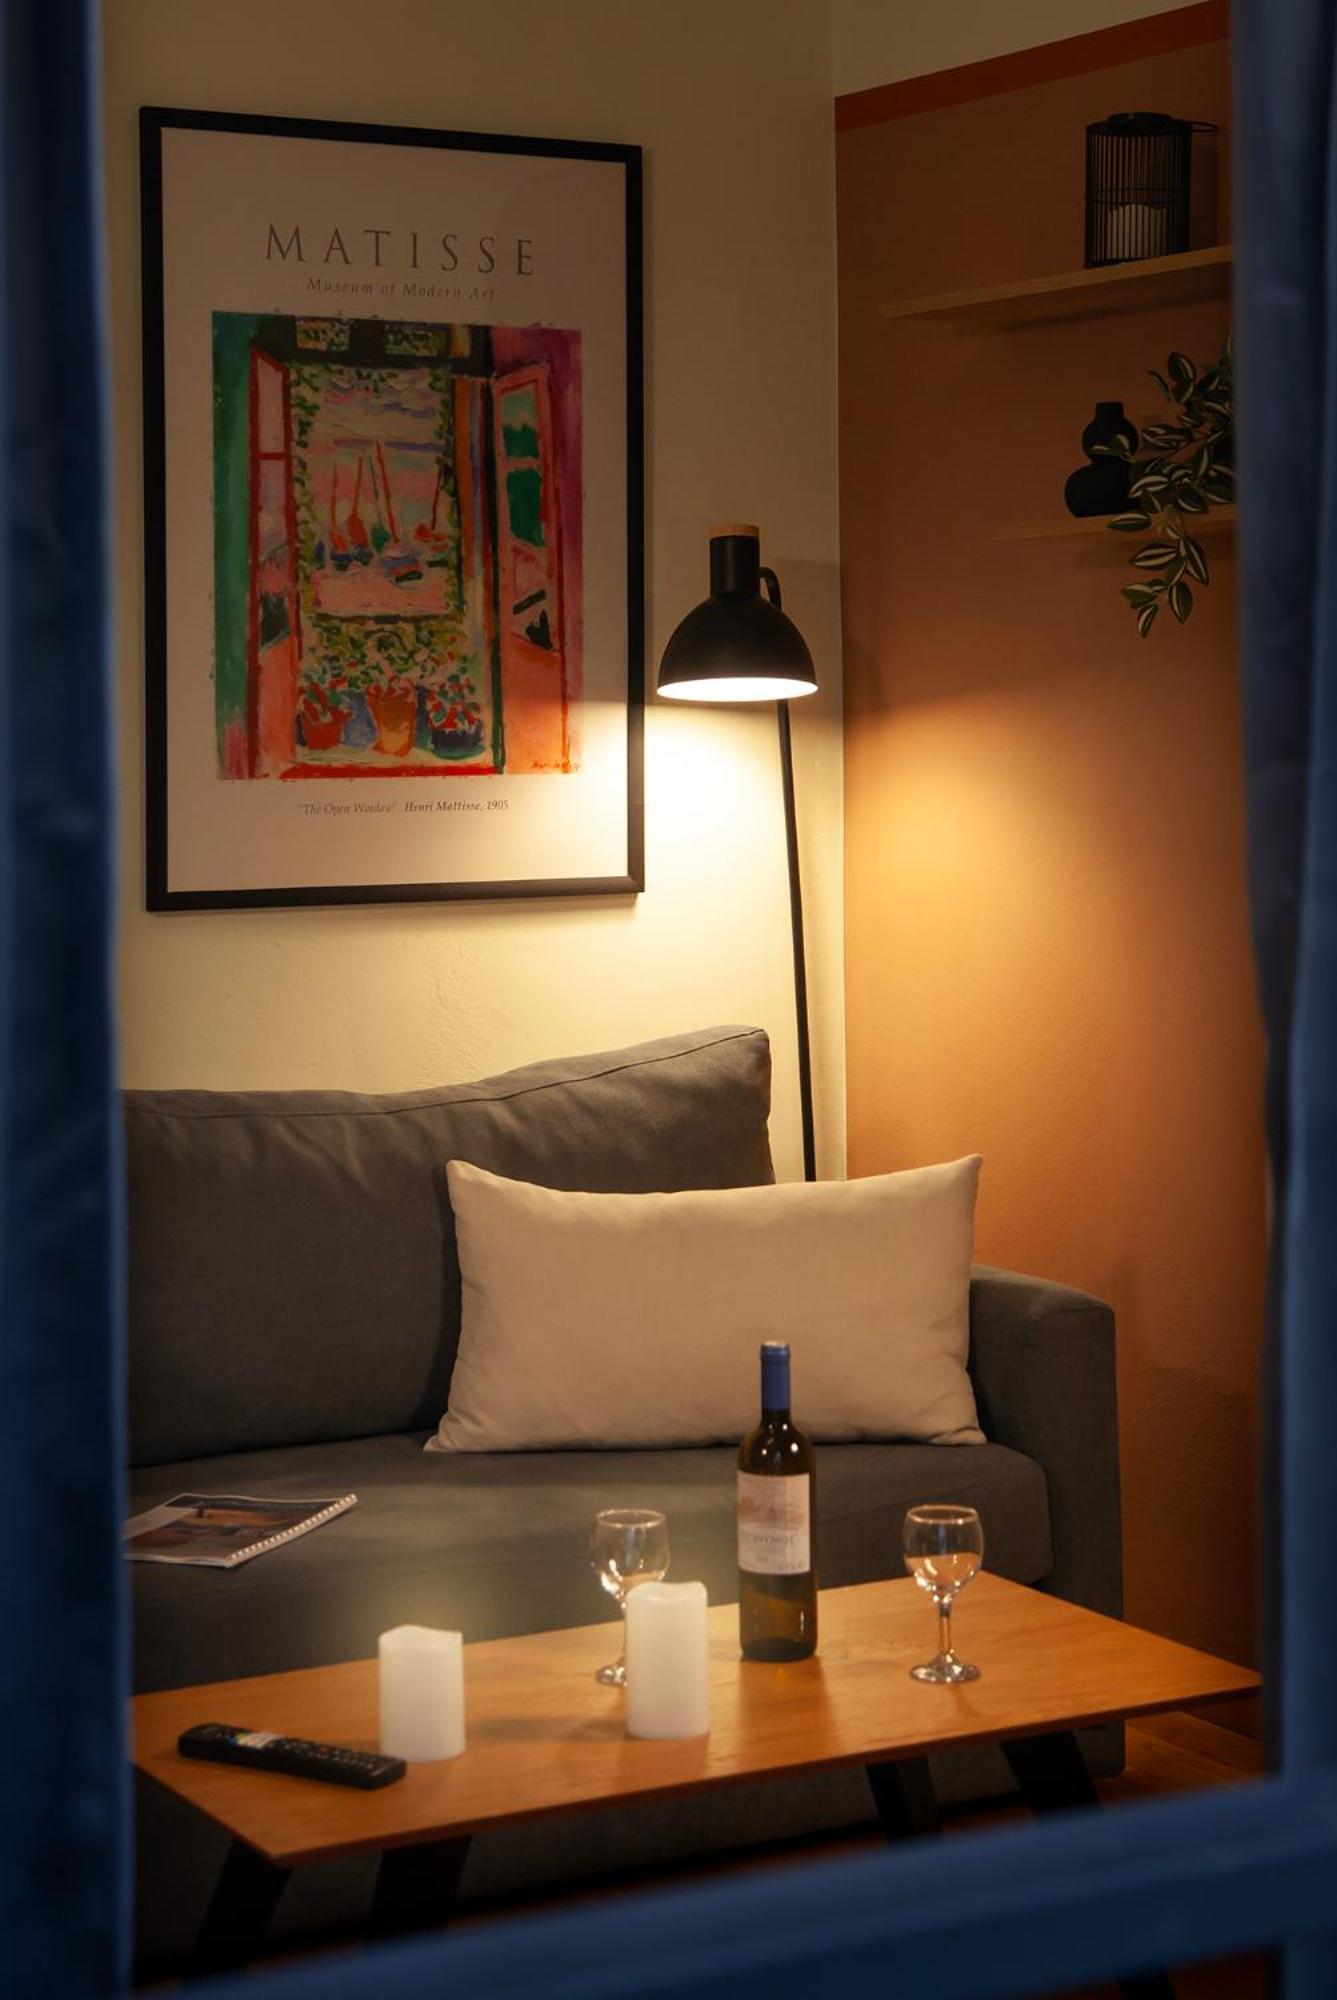 Aris123 By Smart Cozy Suites - Apartments In The Heart Of Athens - 5 Minutes From Metro - Available 24Hr 外观 照片